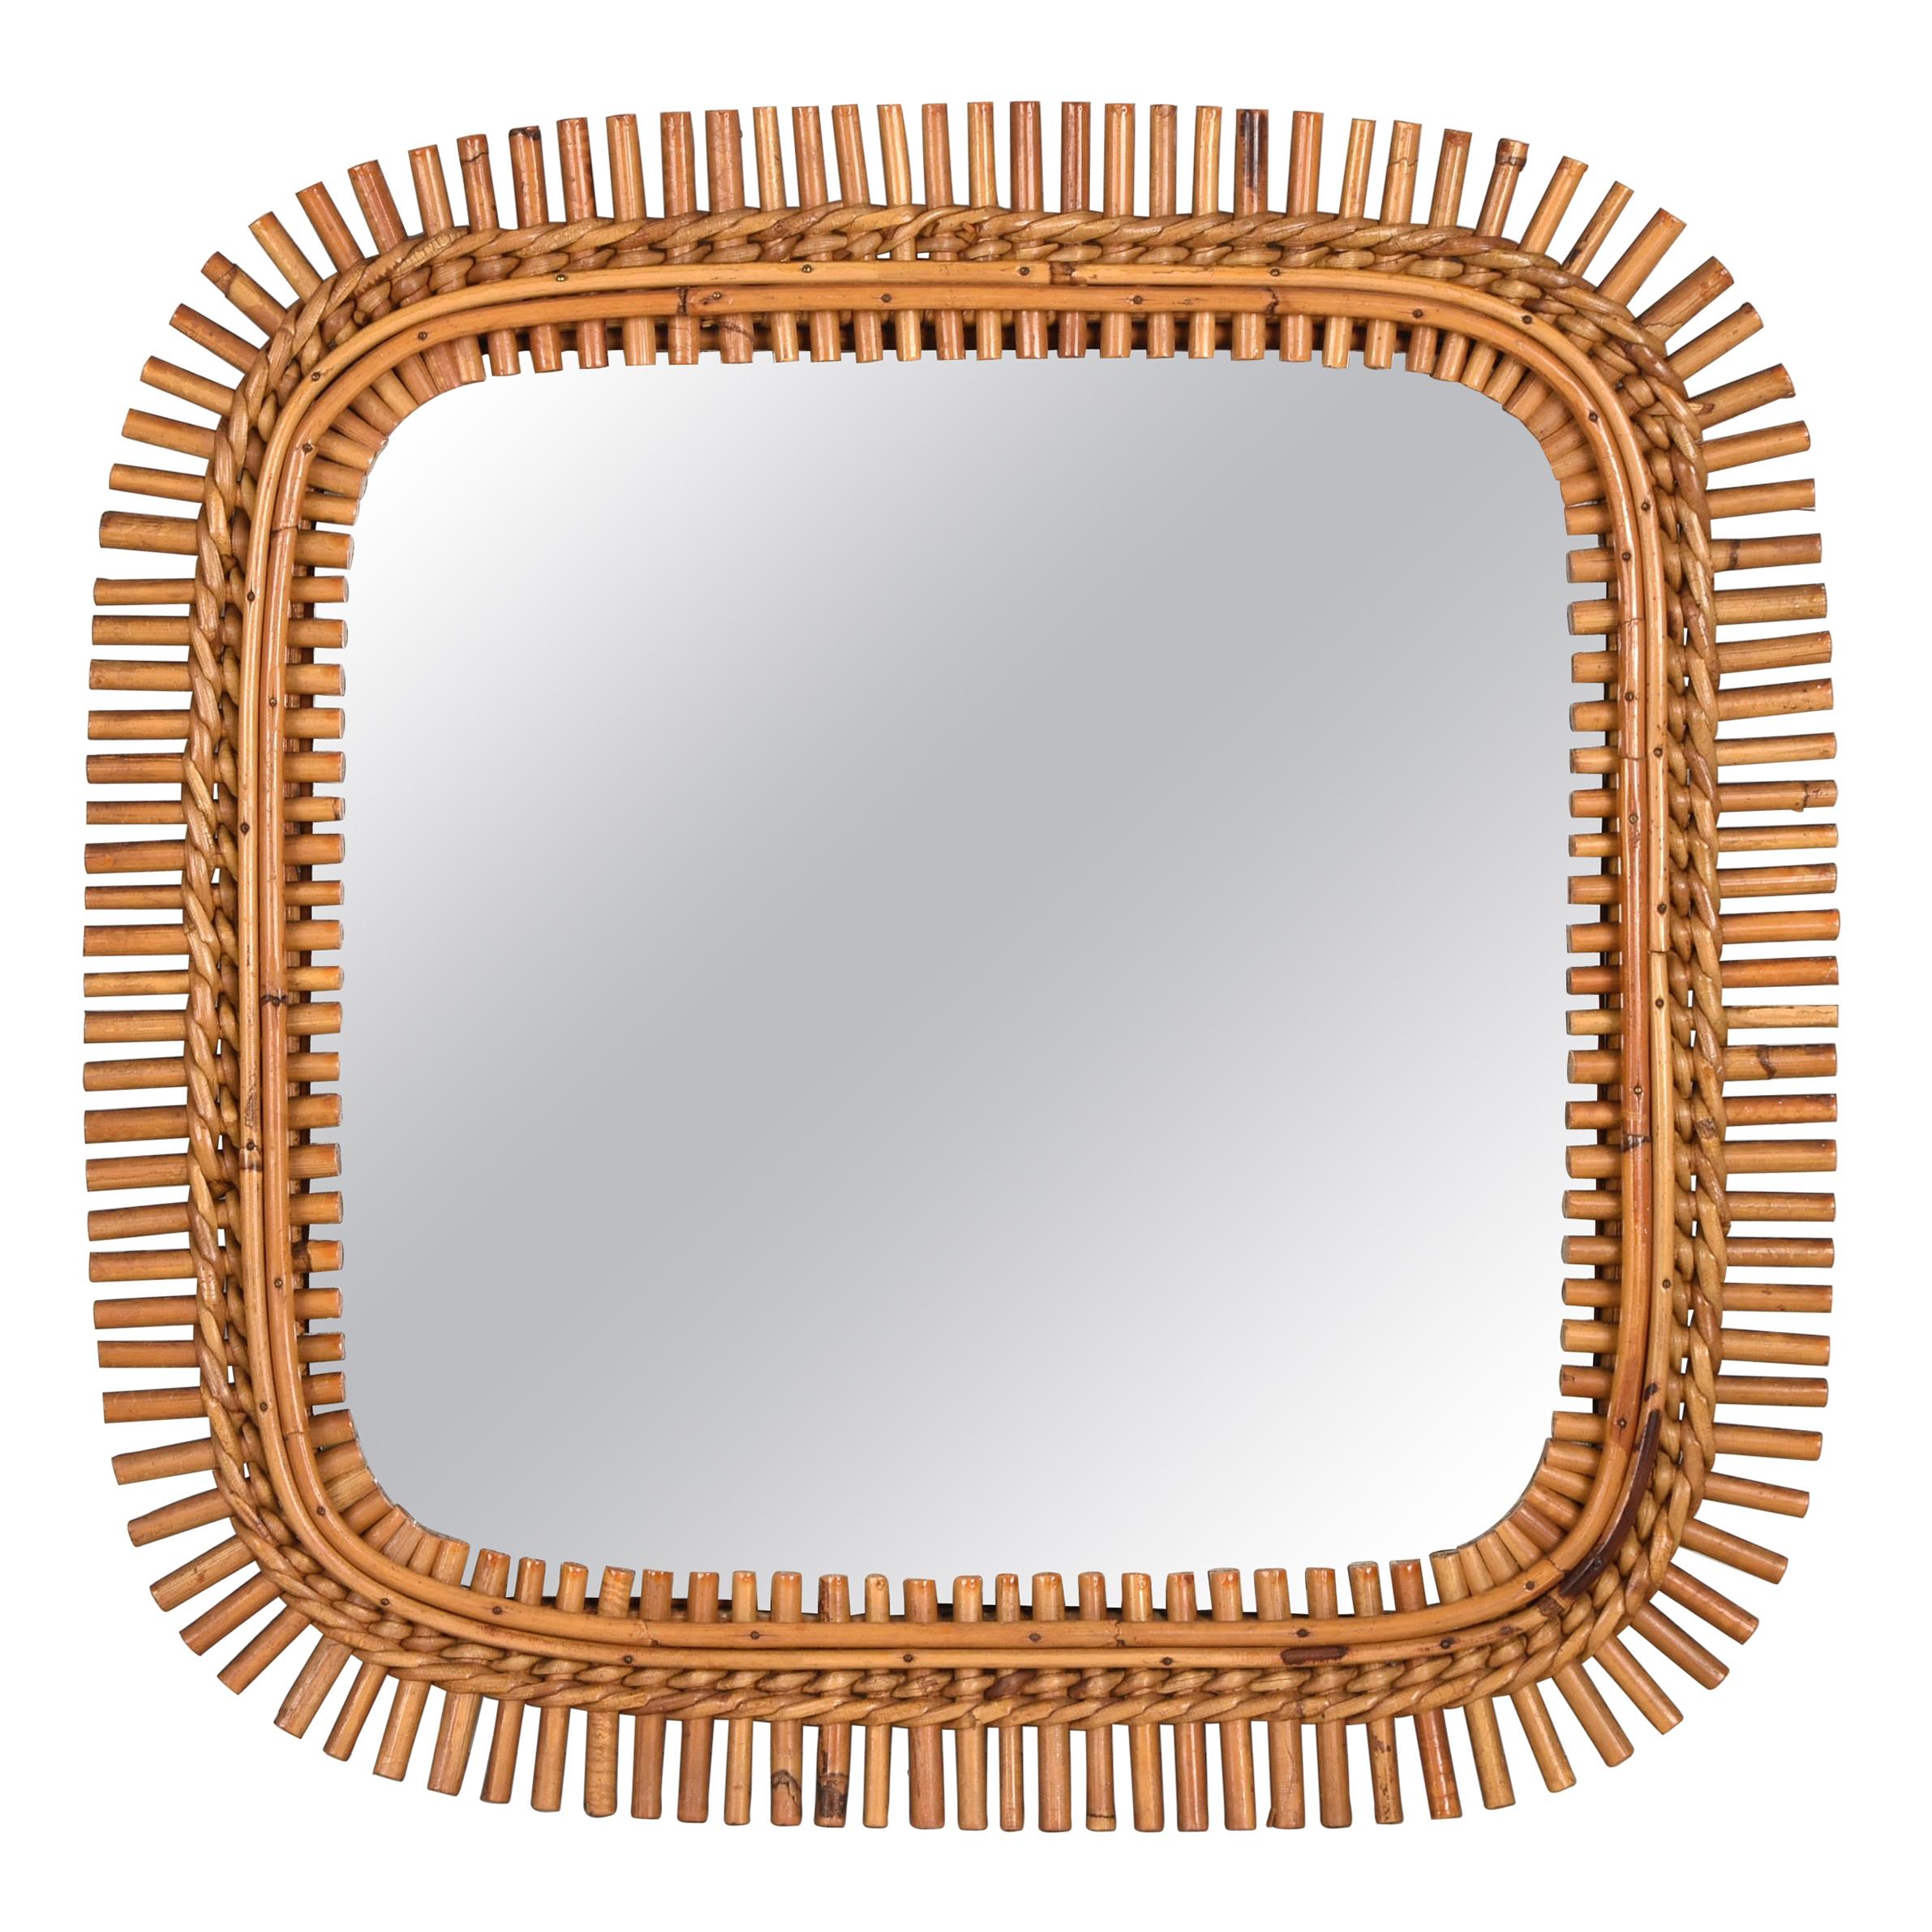 Midcentury French Riviera Bamboo and Rattan Frame Square Wall Mirror, 1960s